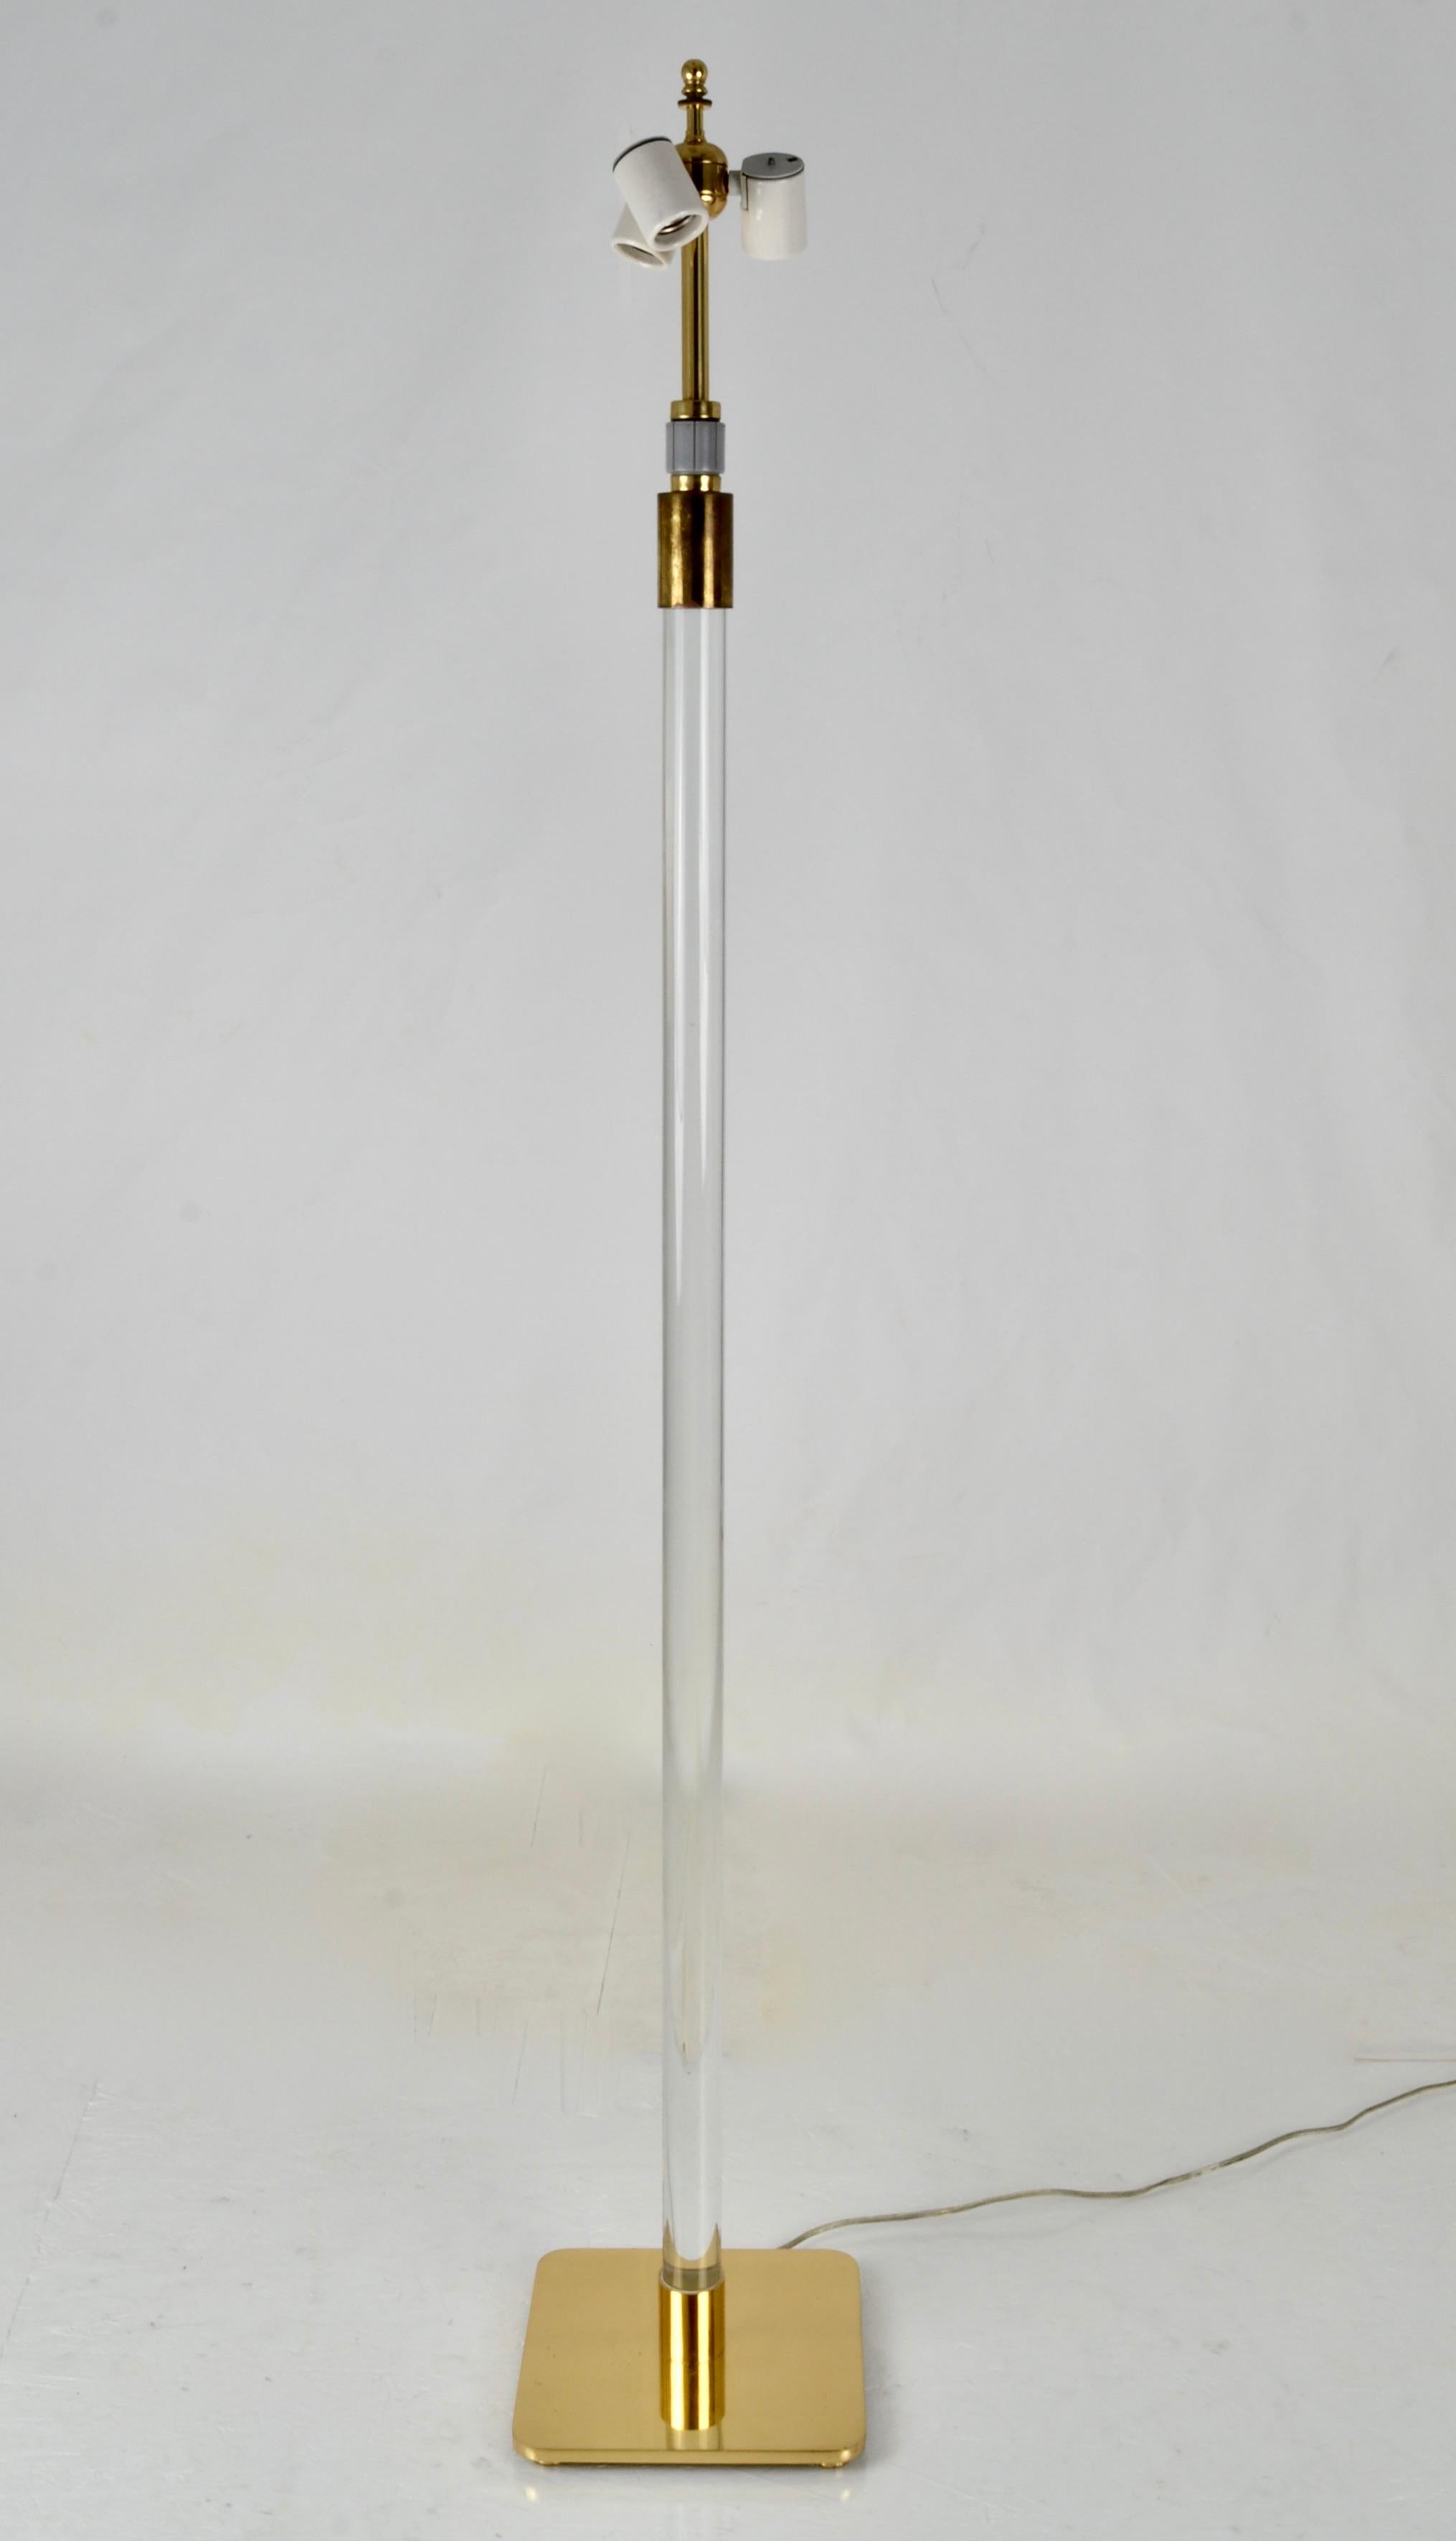 Such an elegant and beautifully crafted floor lamp made by the Hansen Lighting Company. The clear rod is glass, fitted with finely forged solid brass base and lamp. Excellent quality. Original condition, some patina but no damage or significant